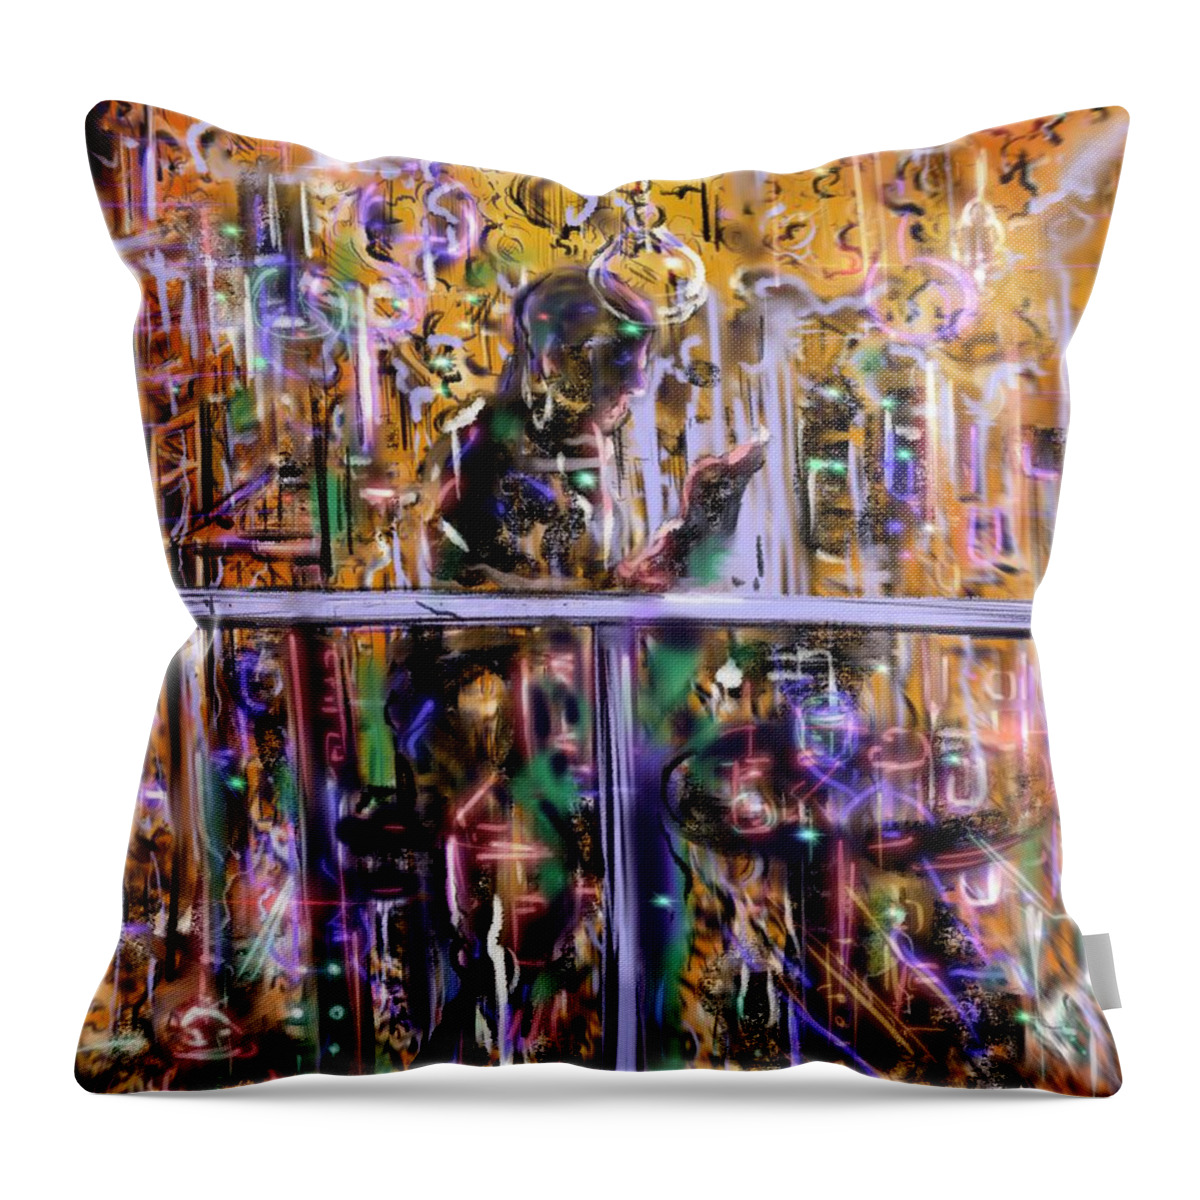 Hours Throw Pillow featuring the digital art The Hours by Angela Weddle